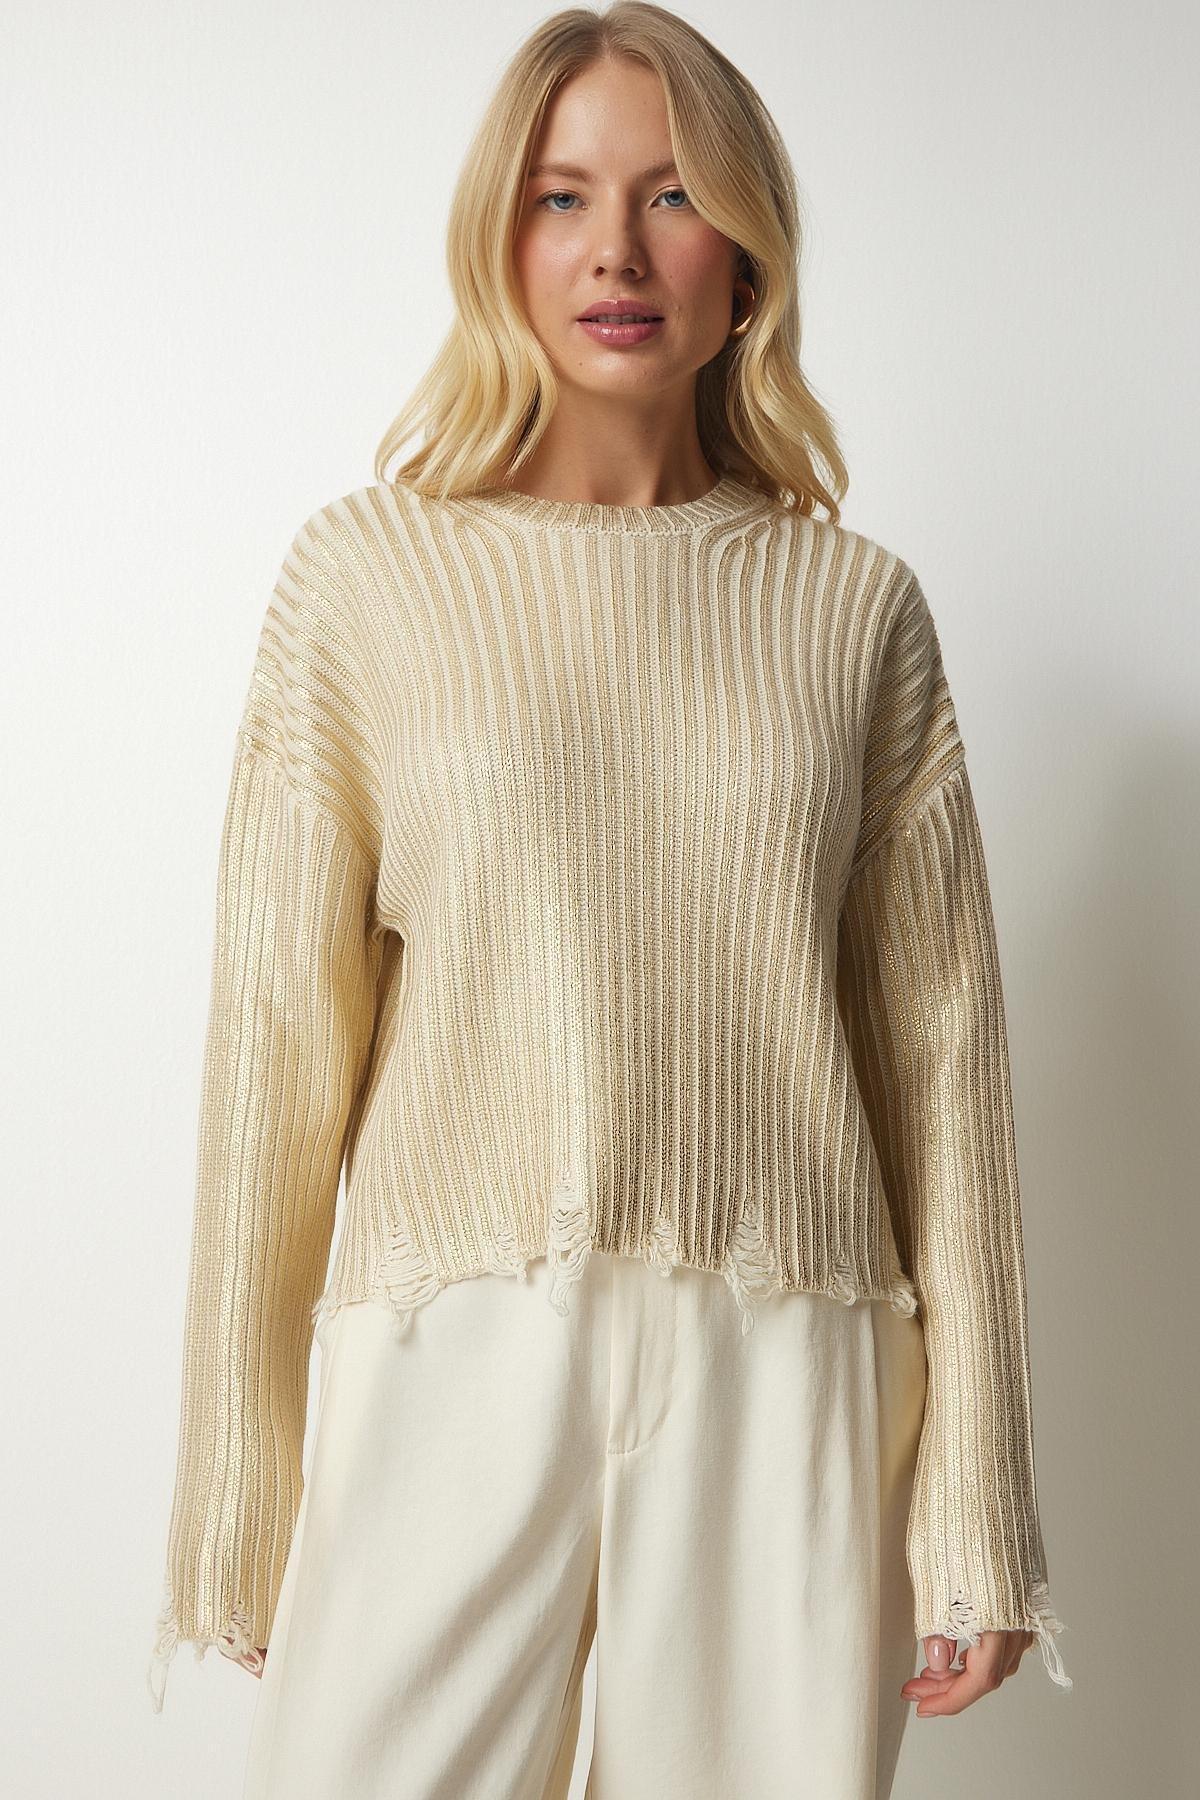 Happiness Istanbul - Yellow Ripped Detail Knitwear Sweater